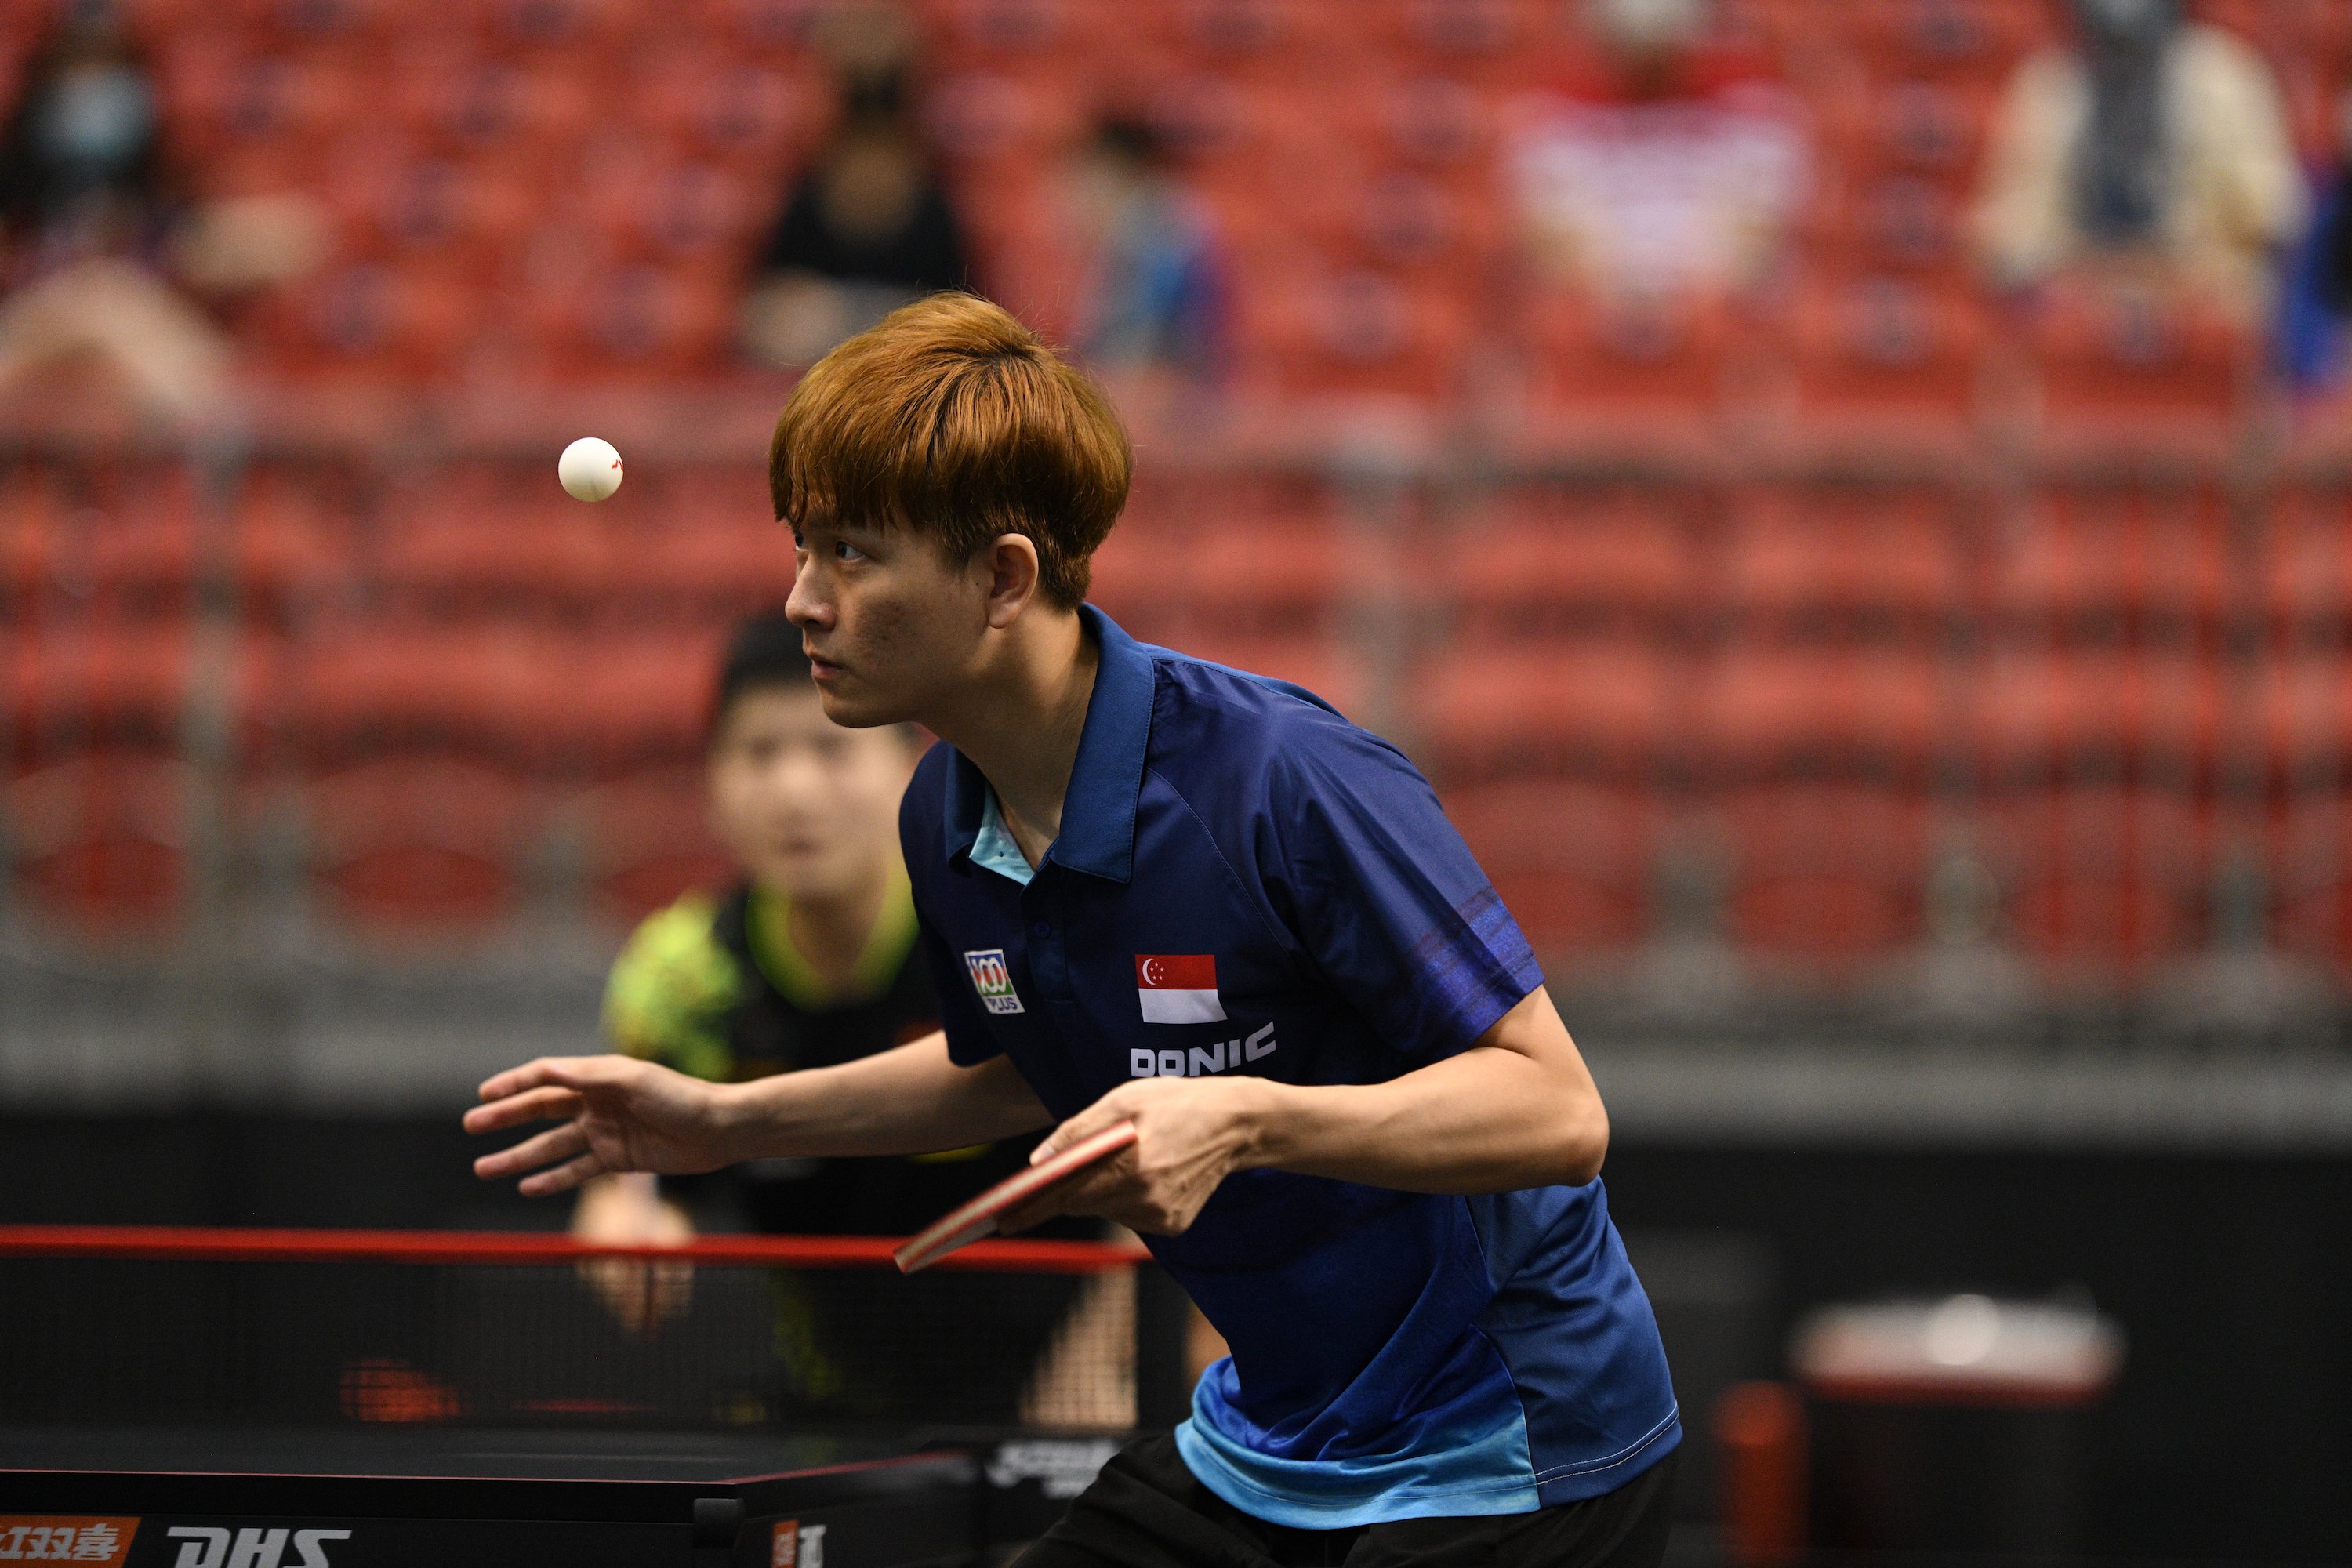 Clarence Chew_Singapore Smash 2022_Photo credit to World Table Tennis